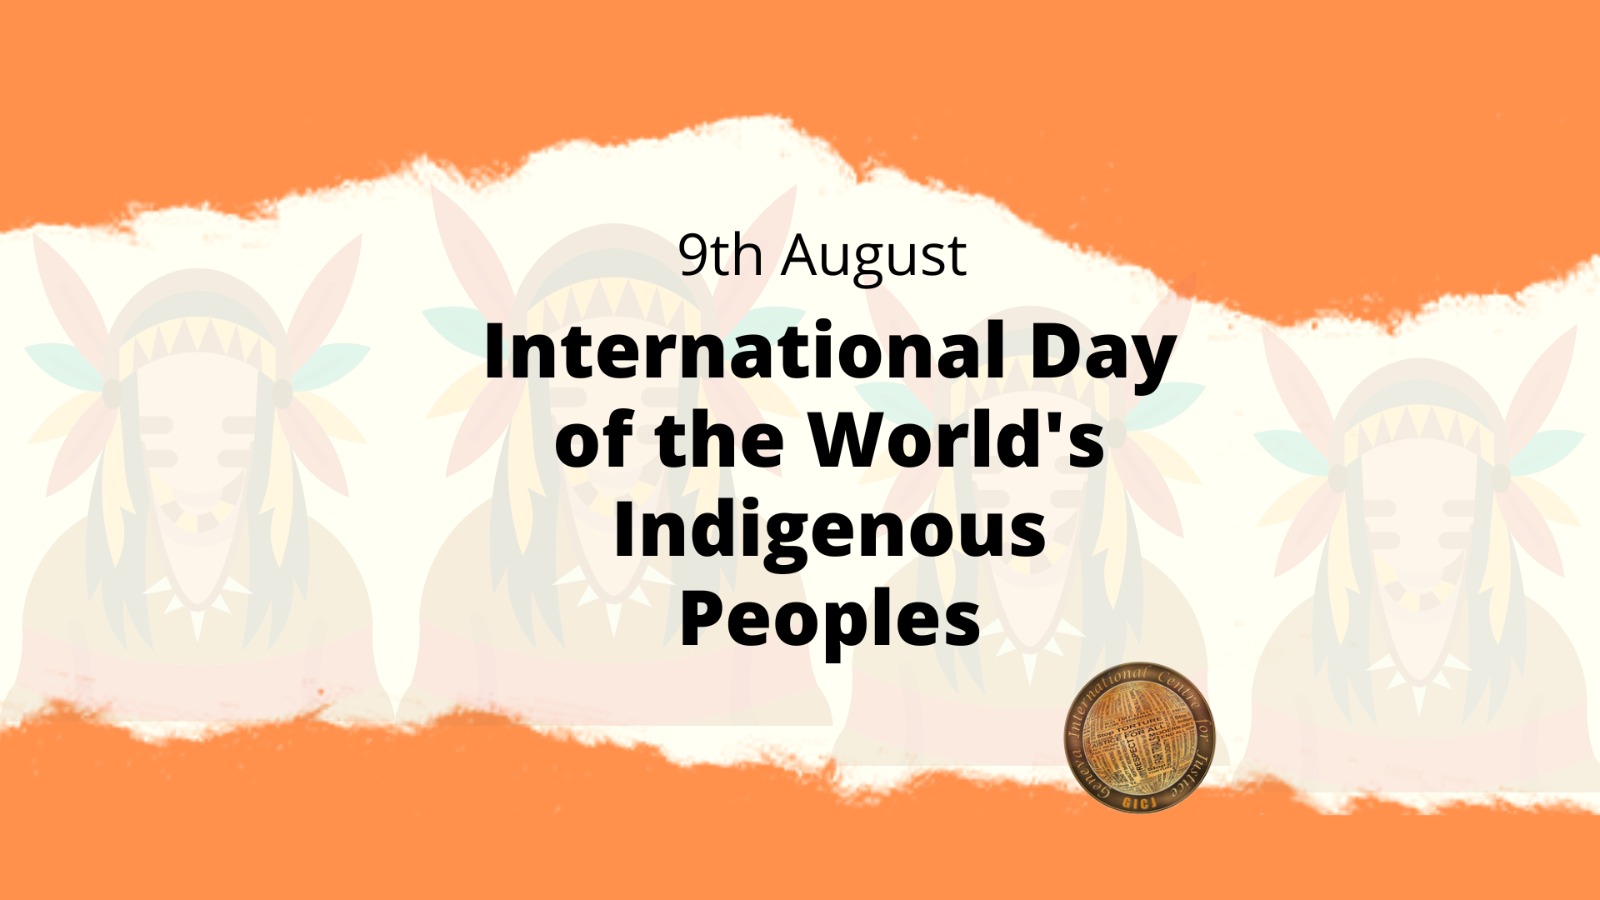 International Day of the World’s Indigenous Peoples 9th August